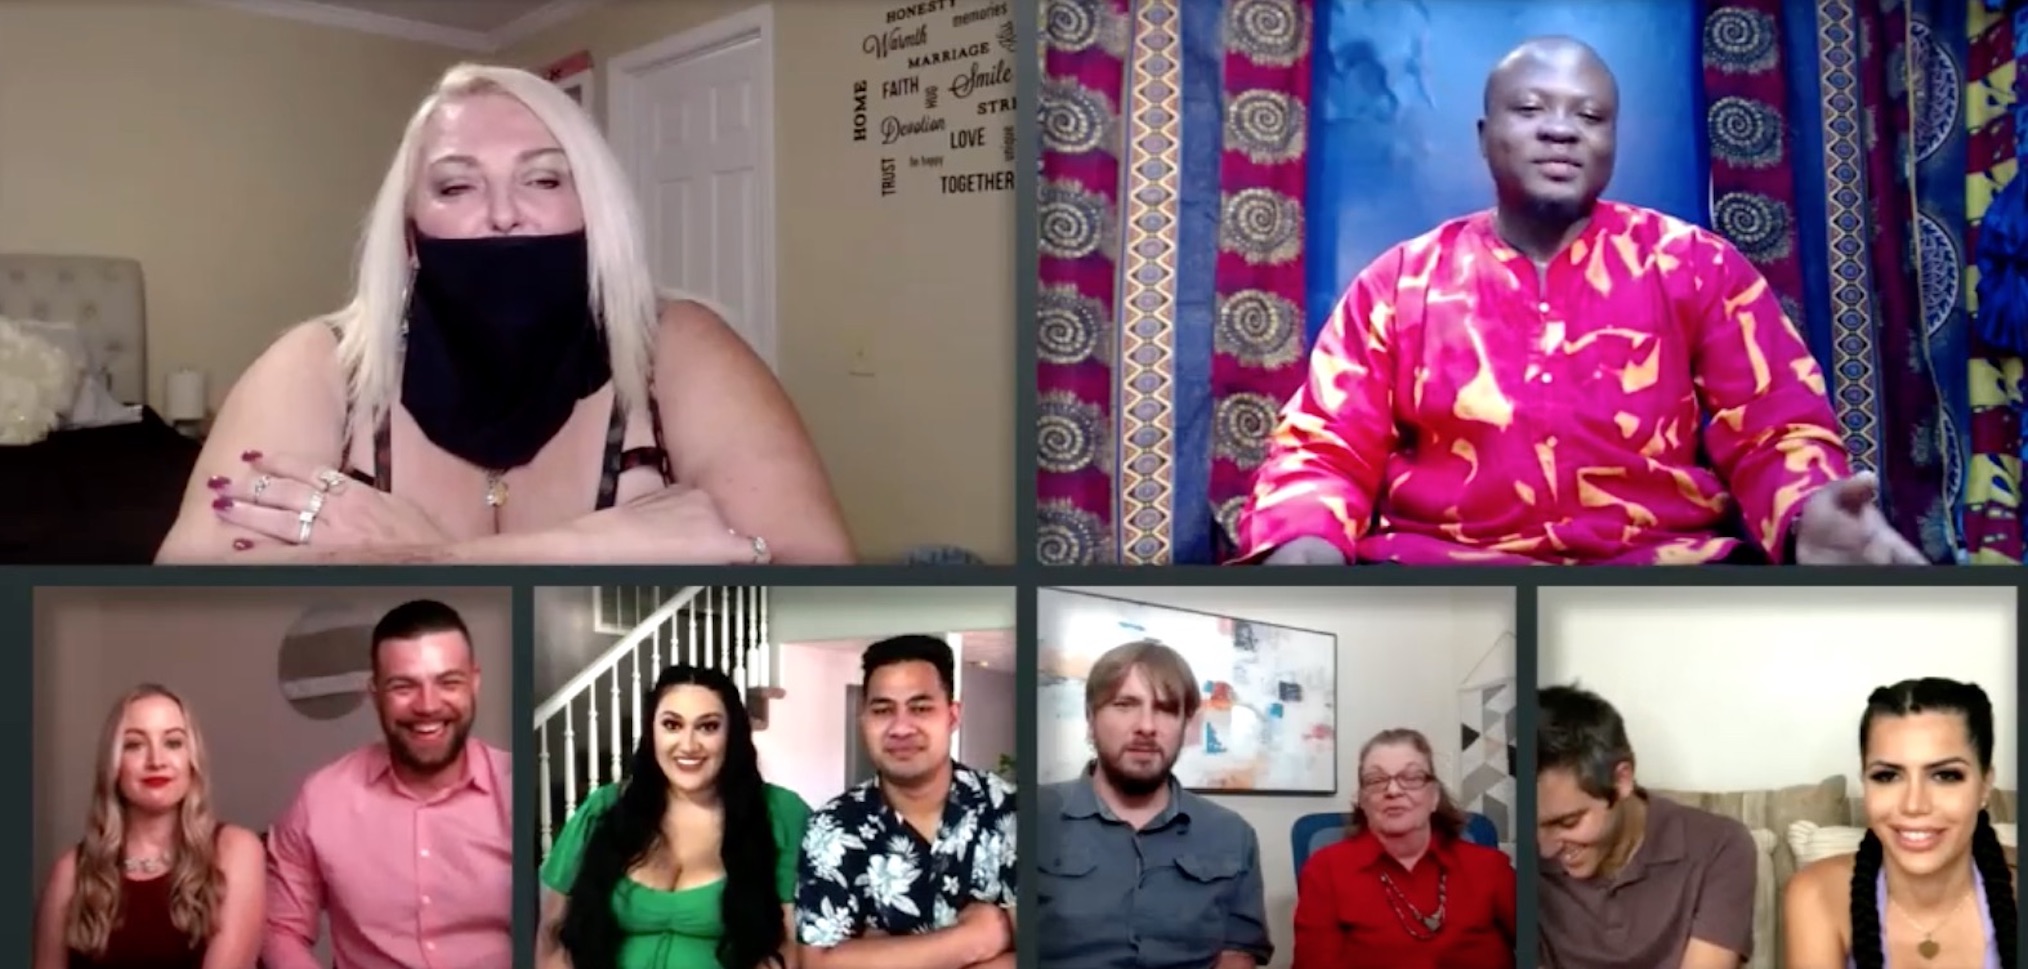 Angela Michael Season 5 Cast Tell All Reunion 90 Day Fiancé: Happily Ever After?